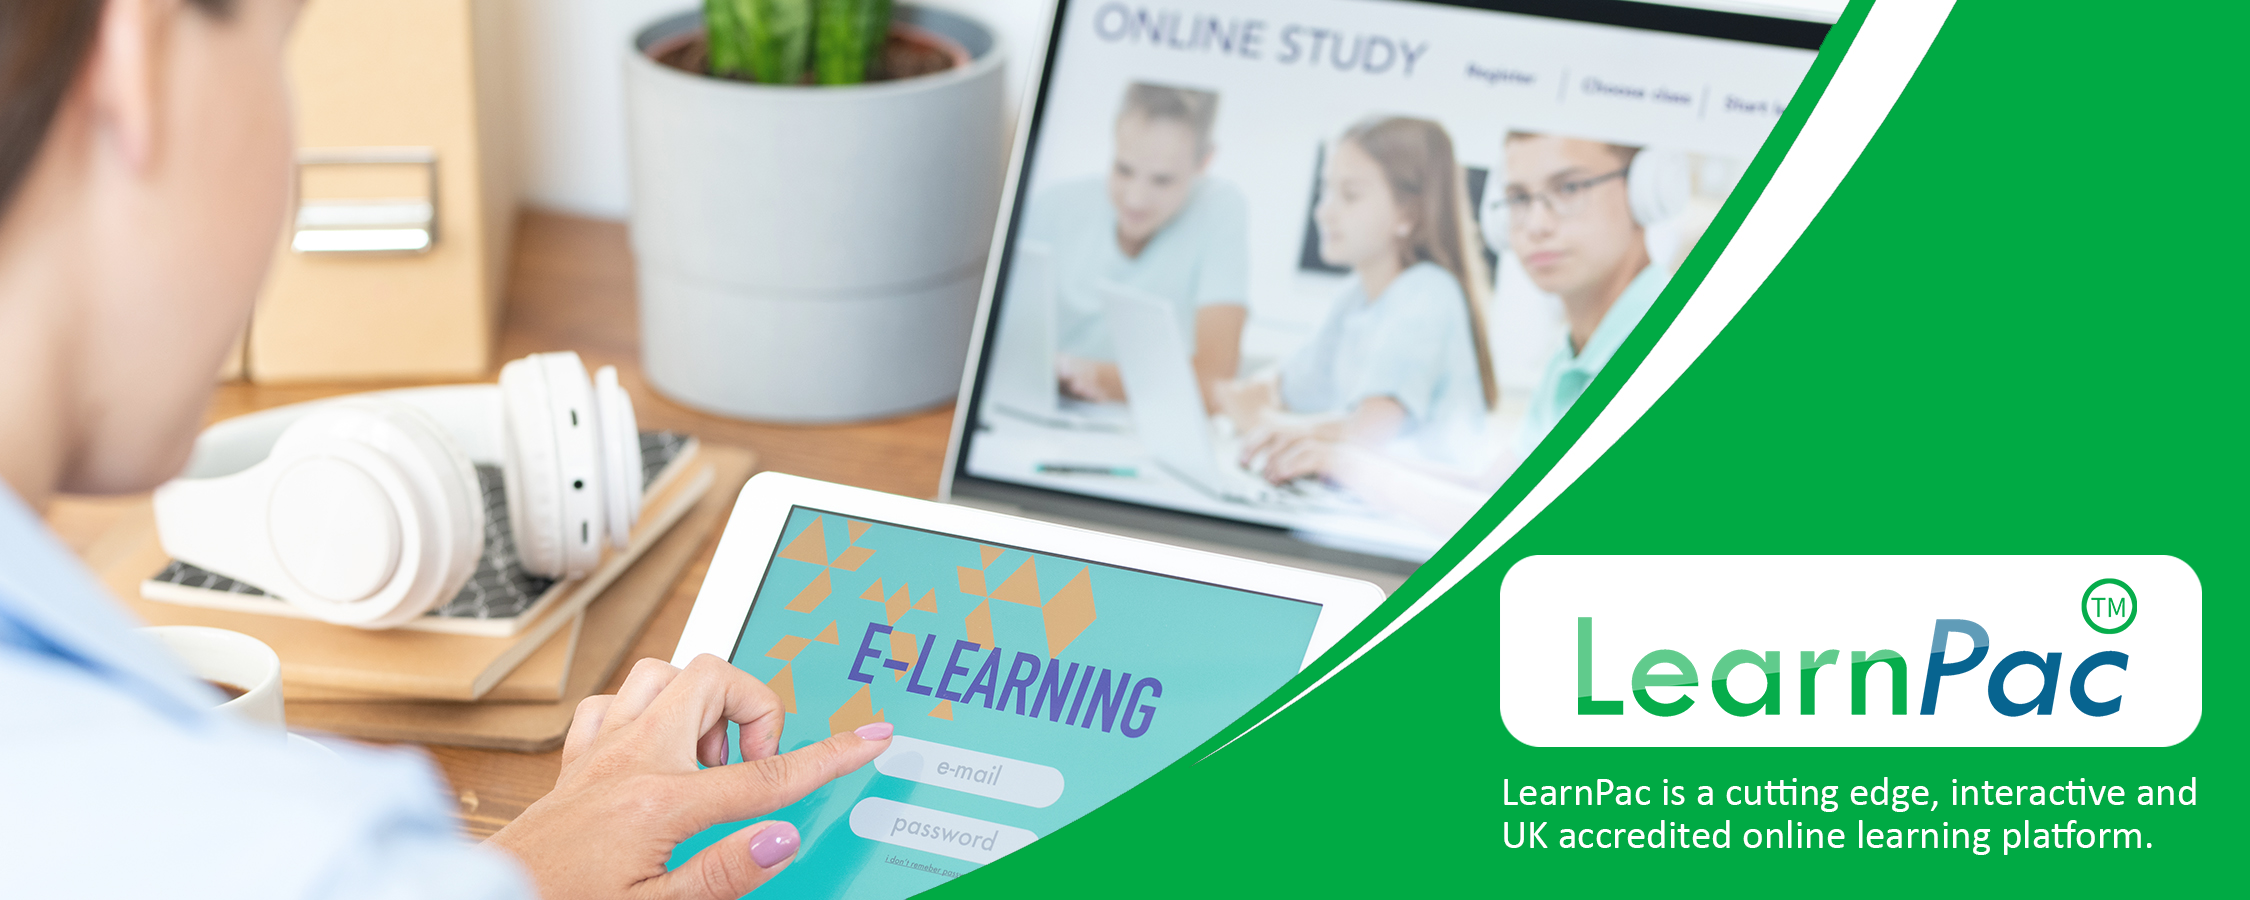 Mandatory Training for Nursing Home Staff - E-Learning Courses - LearnPac Systems UK -